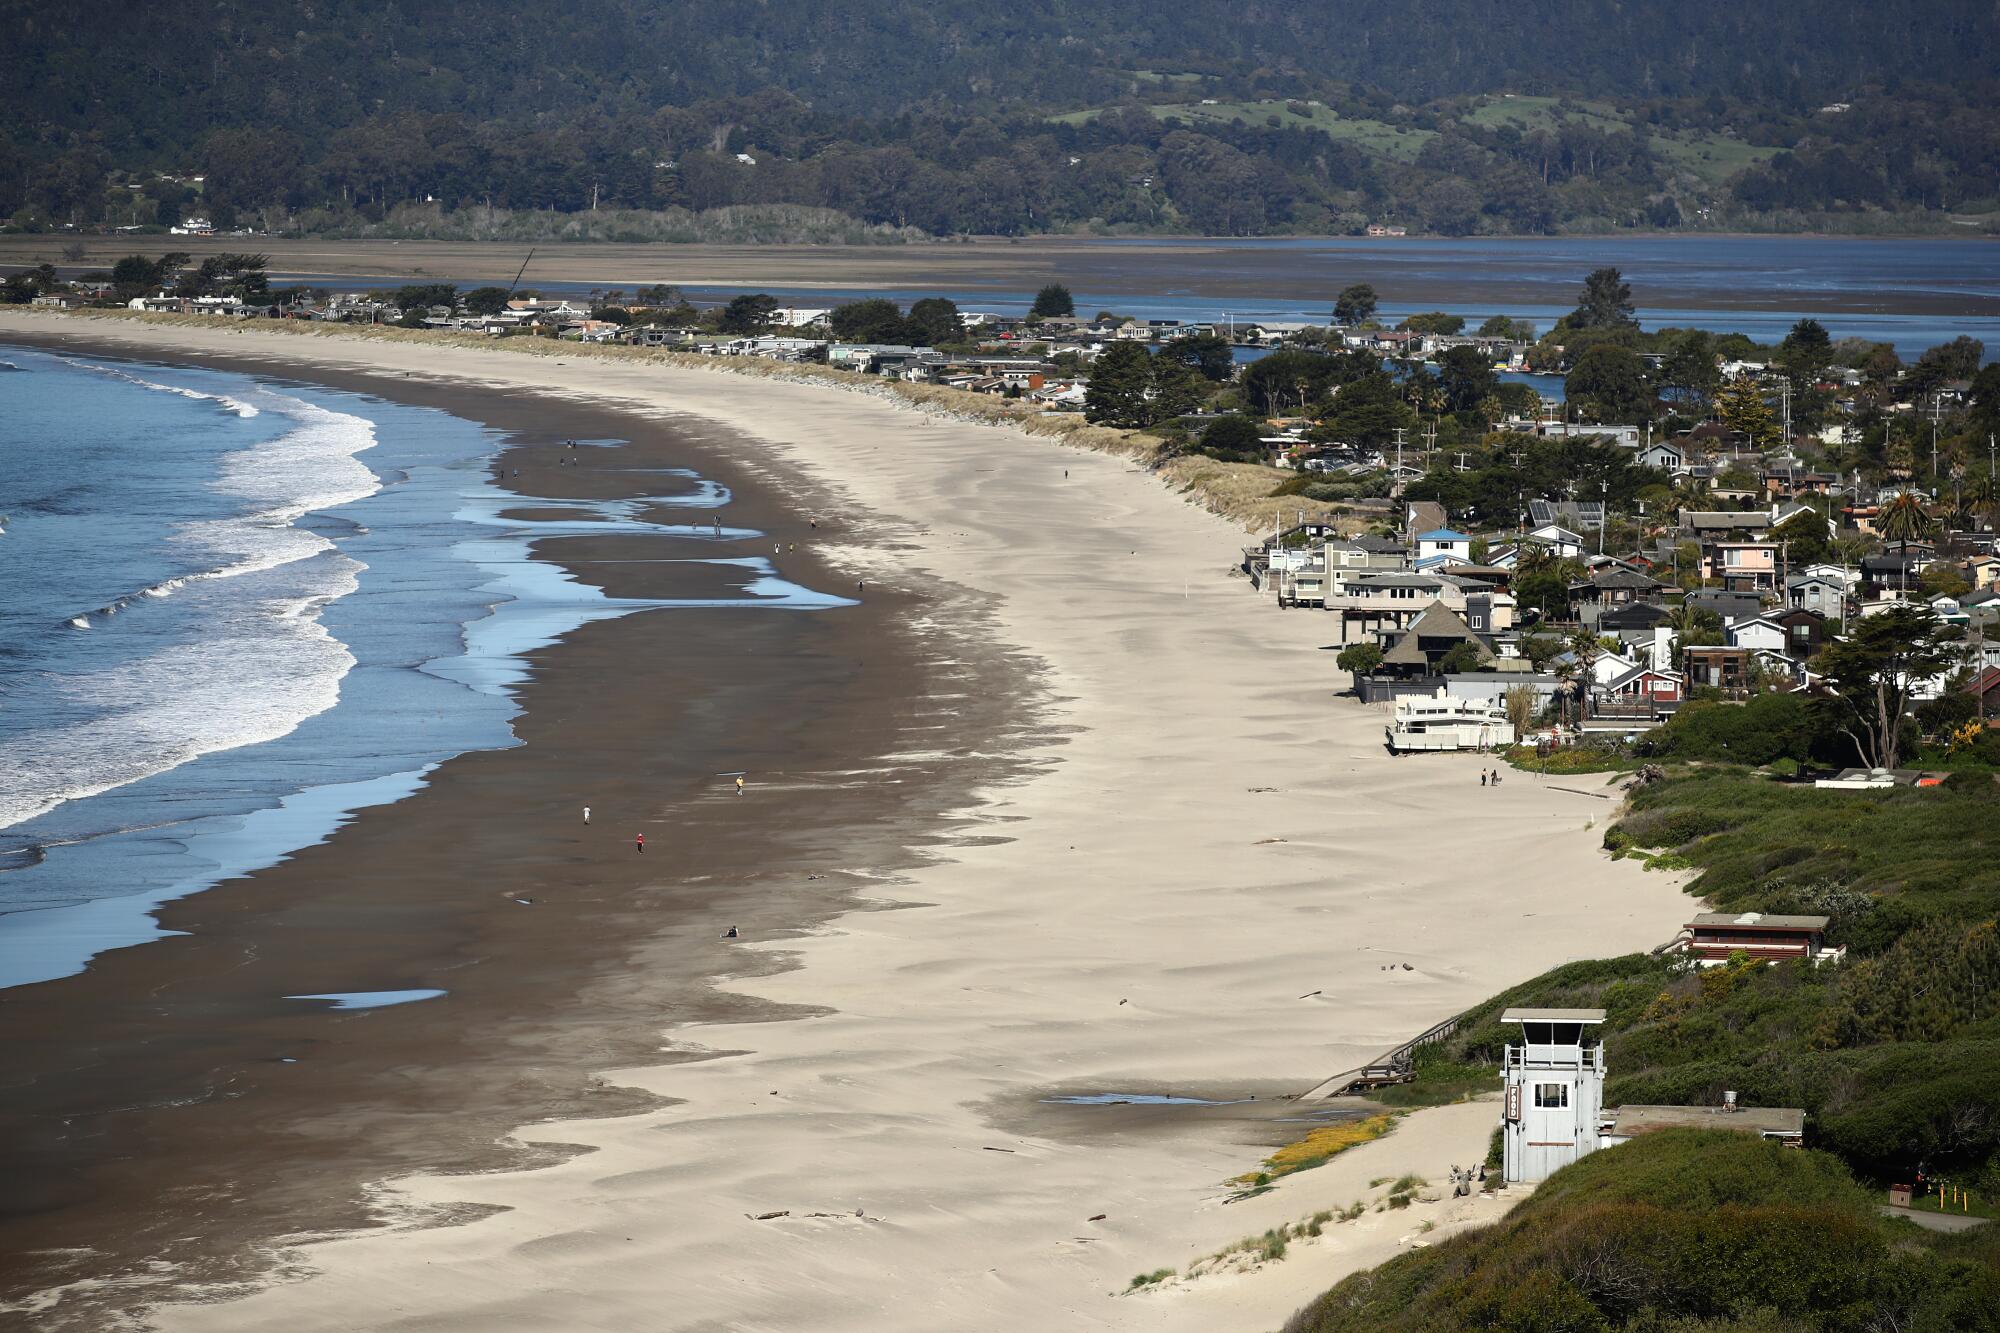 Homes lining a curving sandy shoreline on the ocean, with another body of water and green hills in the background